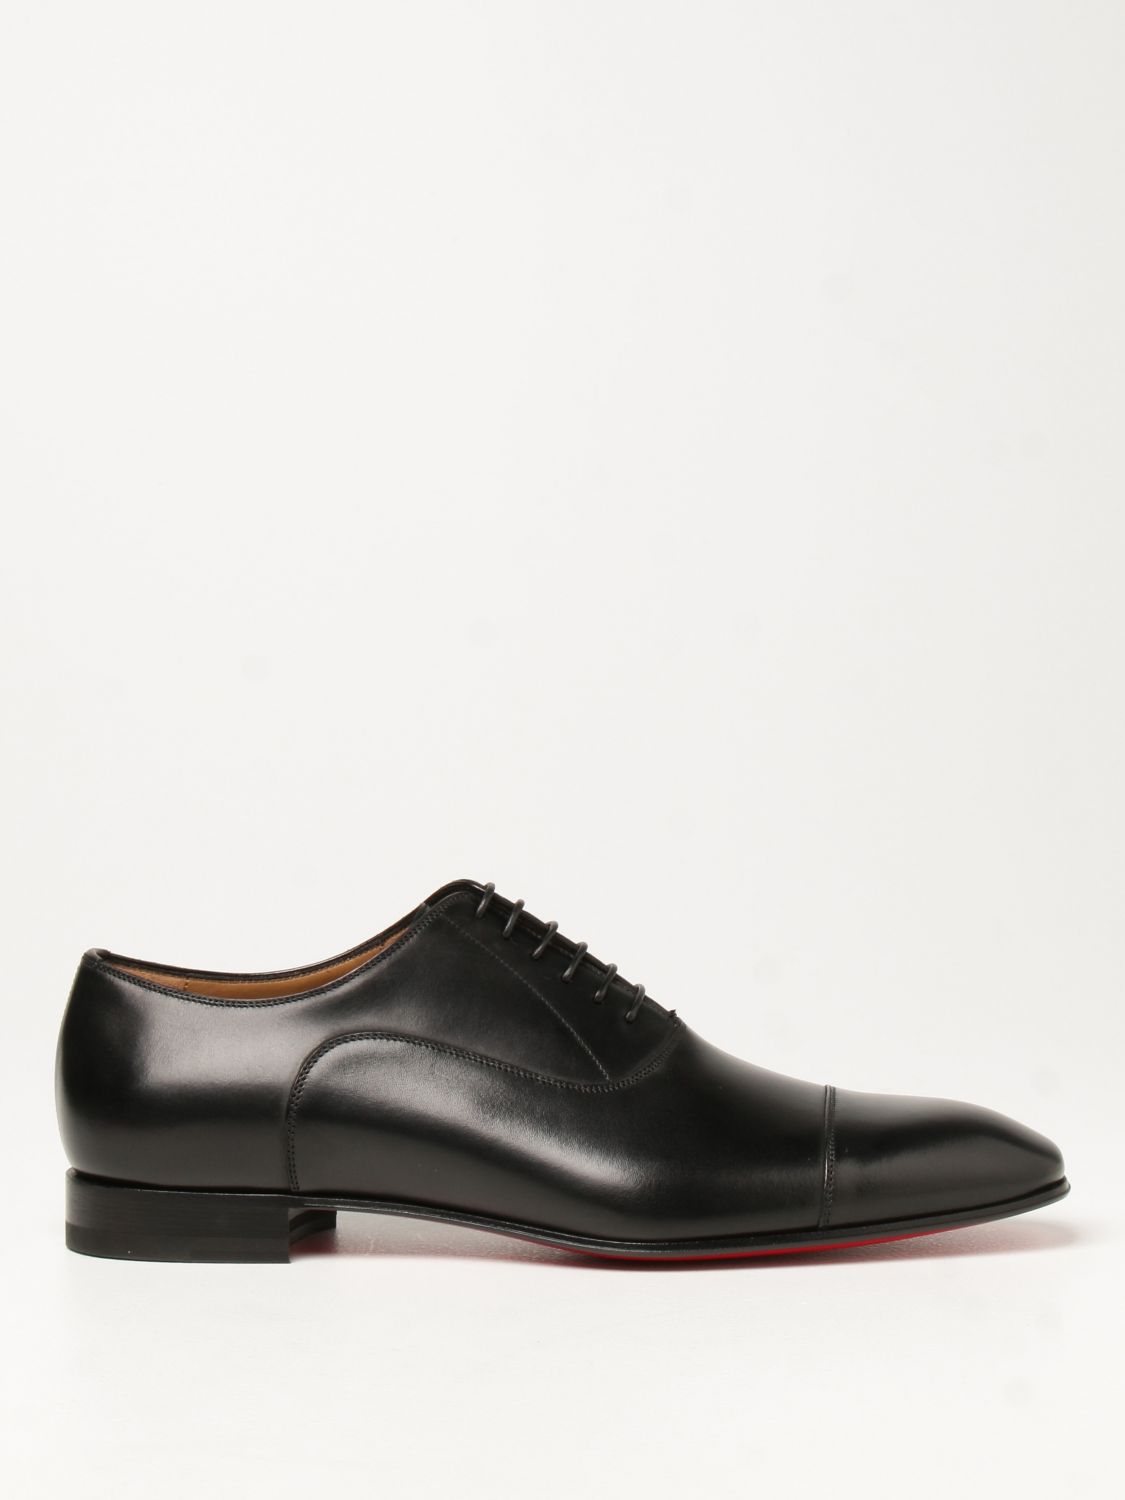 Oxford shoes Greggio Christian Louboutin in leather